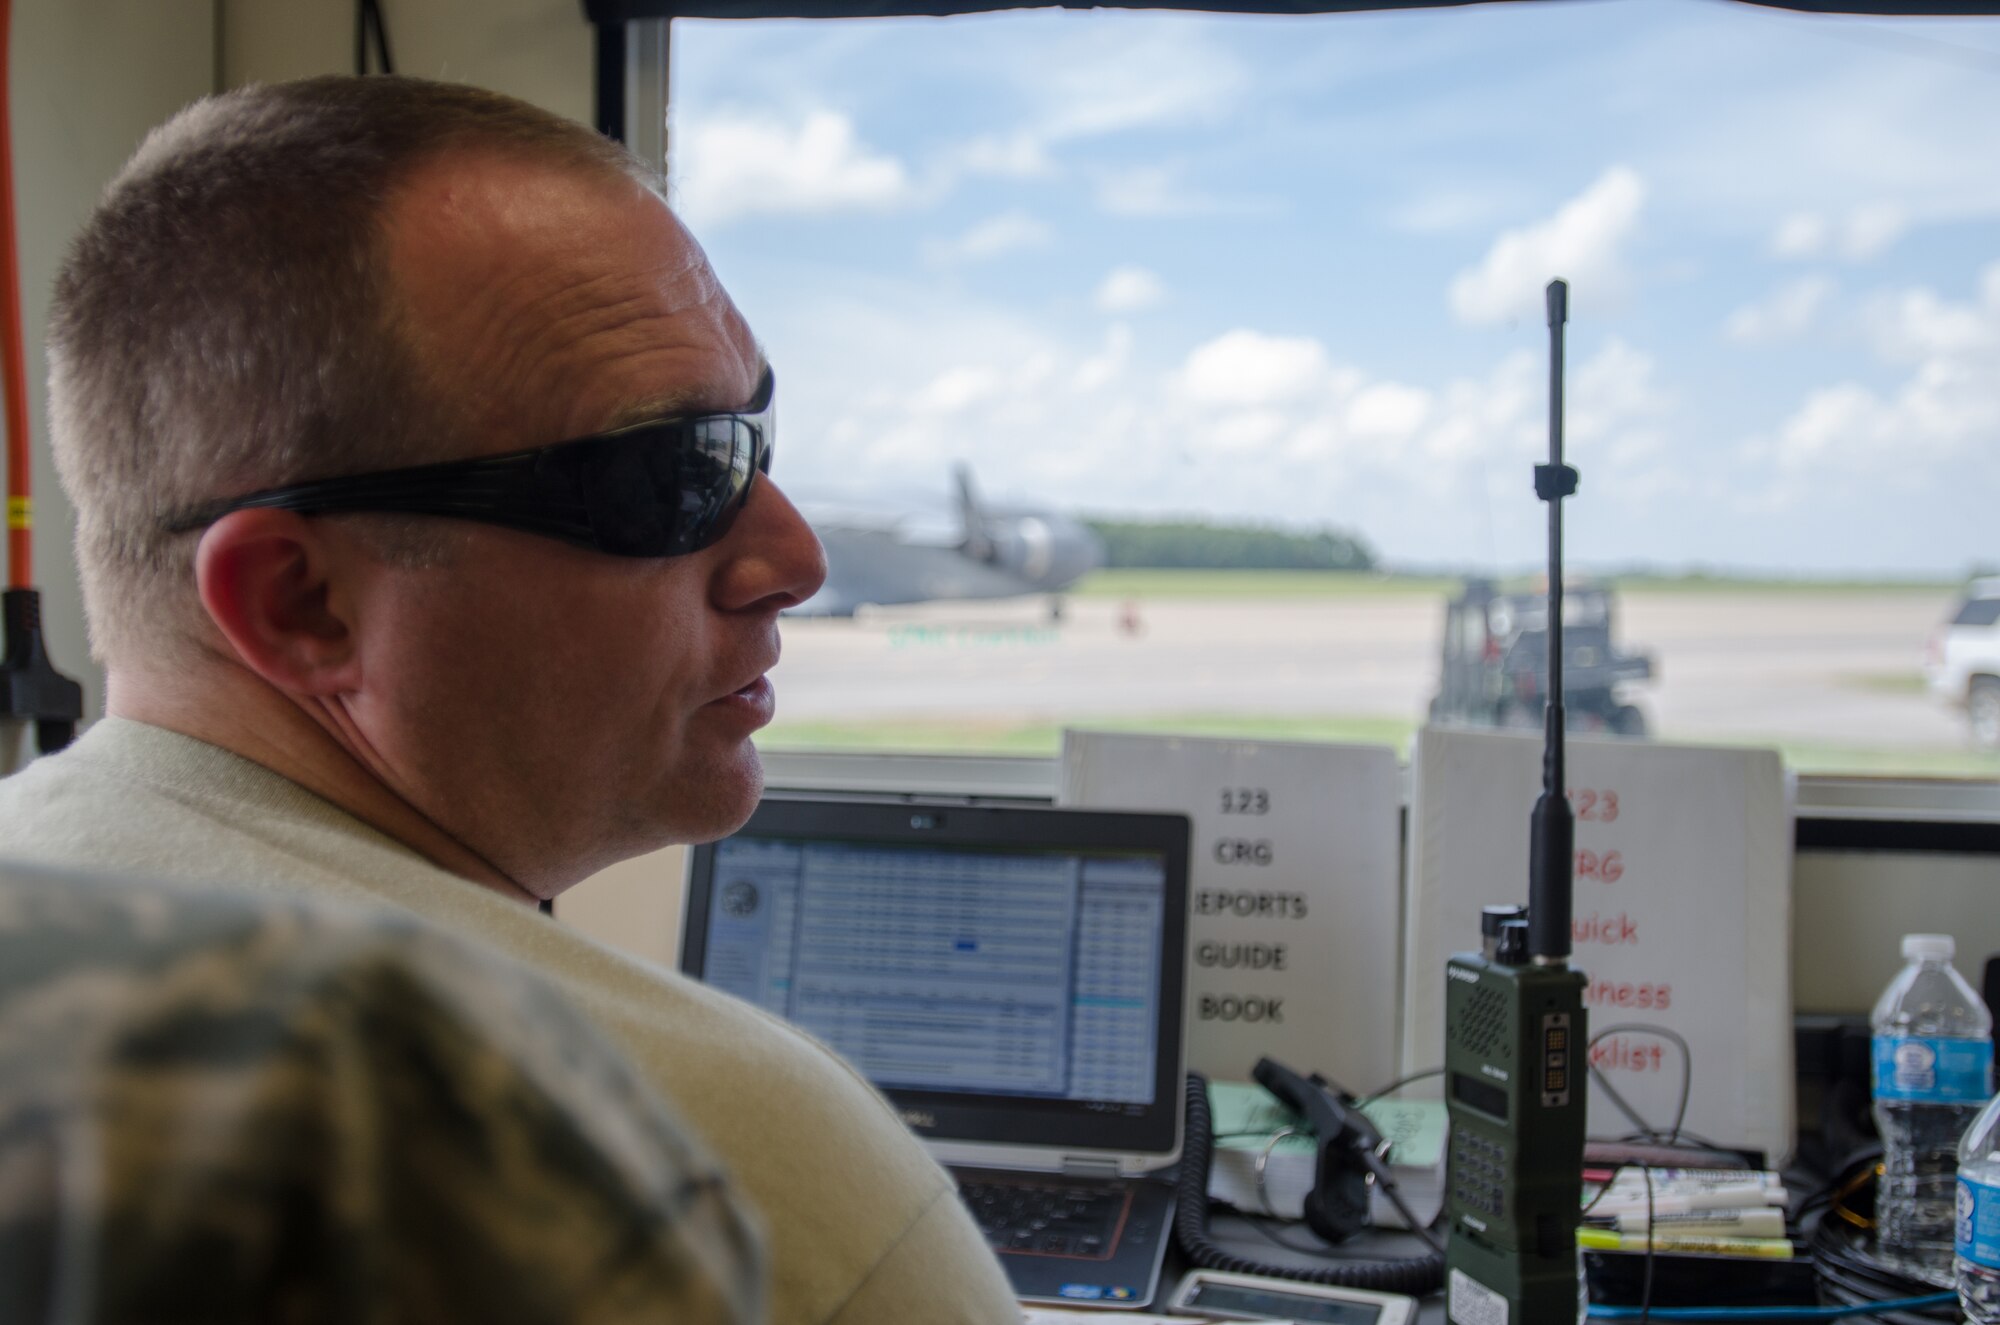 Tech. Sgt. Michael Skeens, command post controller for the Kentucky Air National Guard’s 123rd Contingency Response Group, tracks aircraft on the airfield at Fort Campbell, Ky., June 18, 2014, during Capstone '14, a homeland earthquake-response exercise. The 123rd CRG joined forces with the U.S. Army’s 688th Rapid Port Opening Element to operate a Joint Task Force-Port Opening here from June 16 to 19, 2014. (U.S. Air National Guard photo by Master Sgt. Phil Speck)